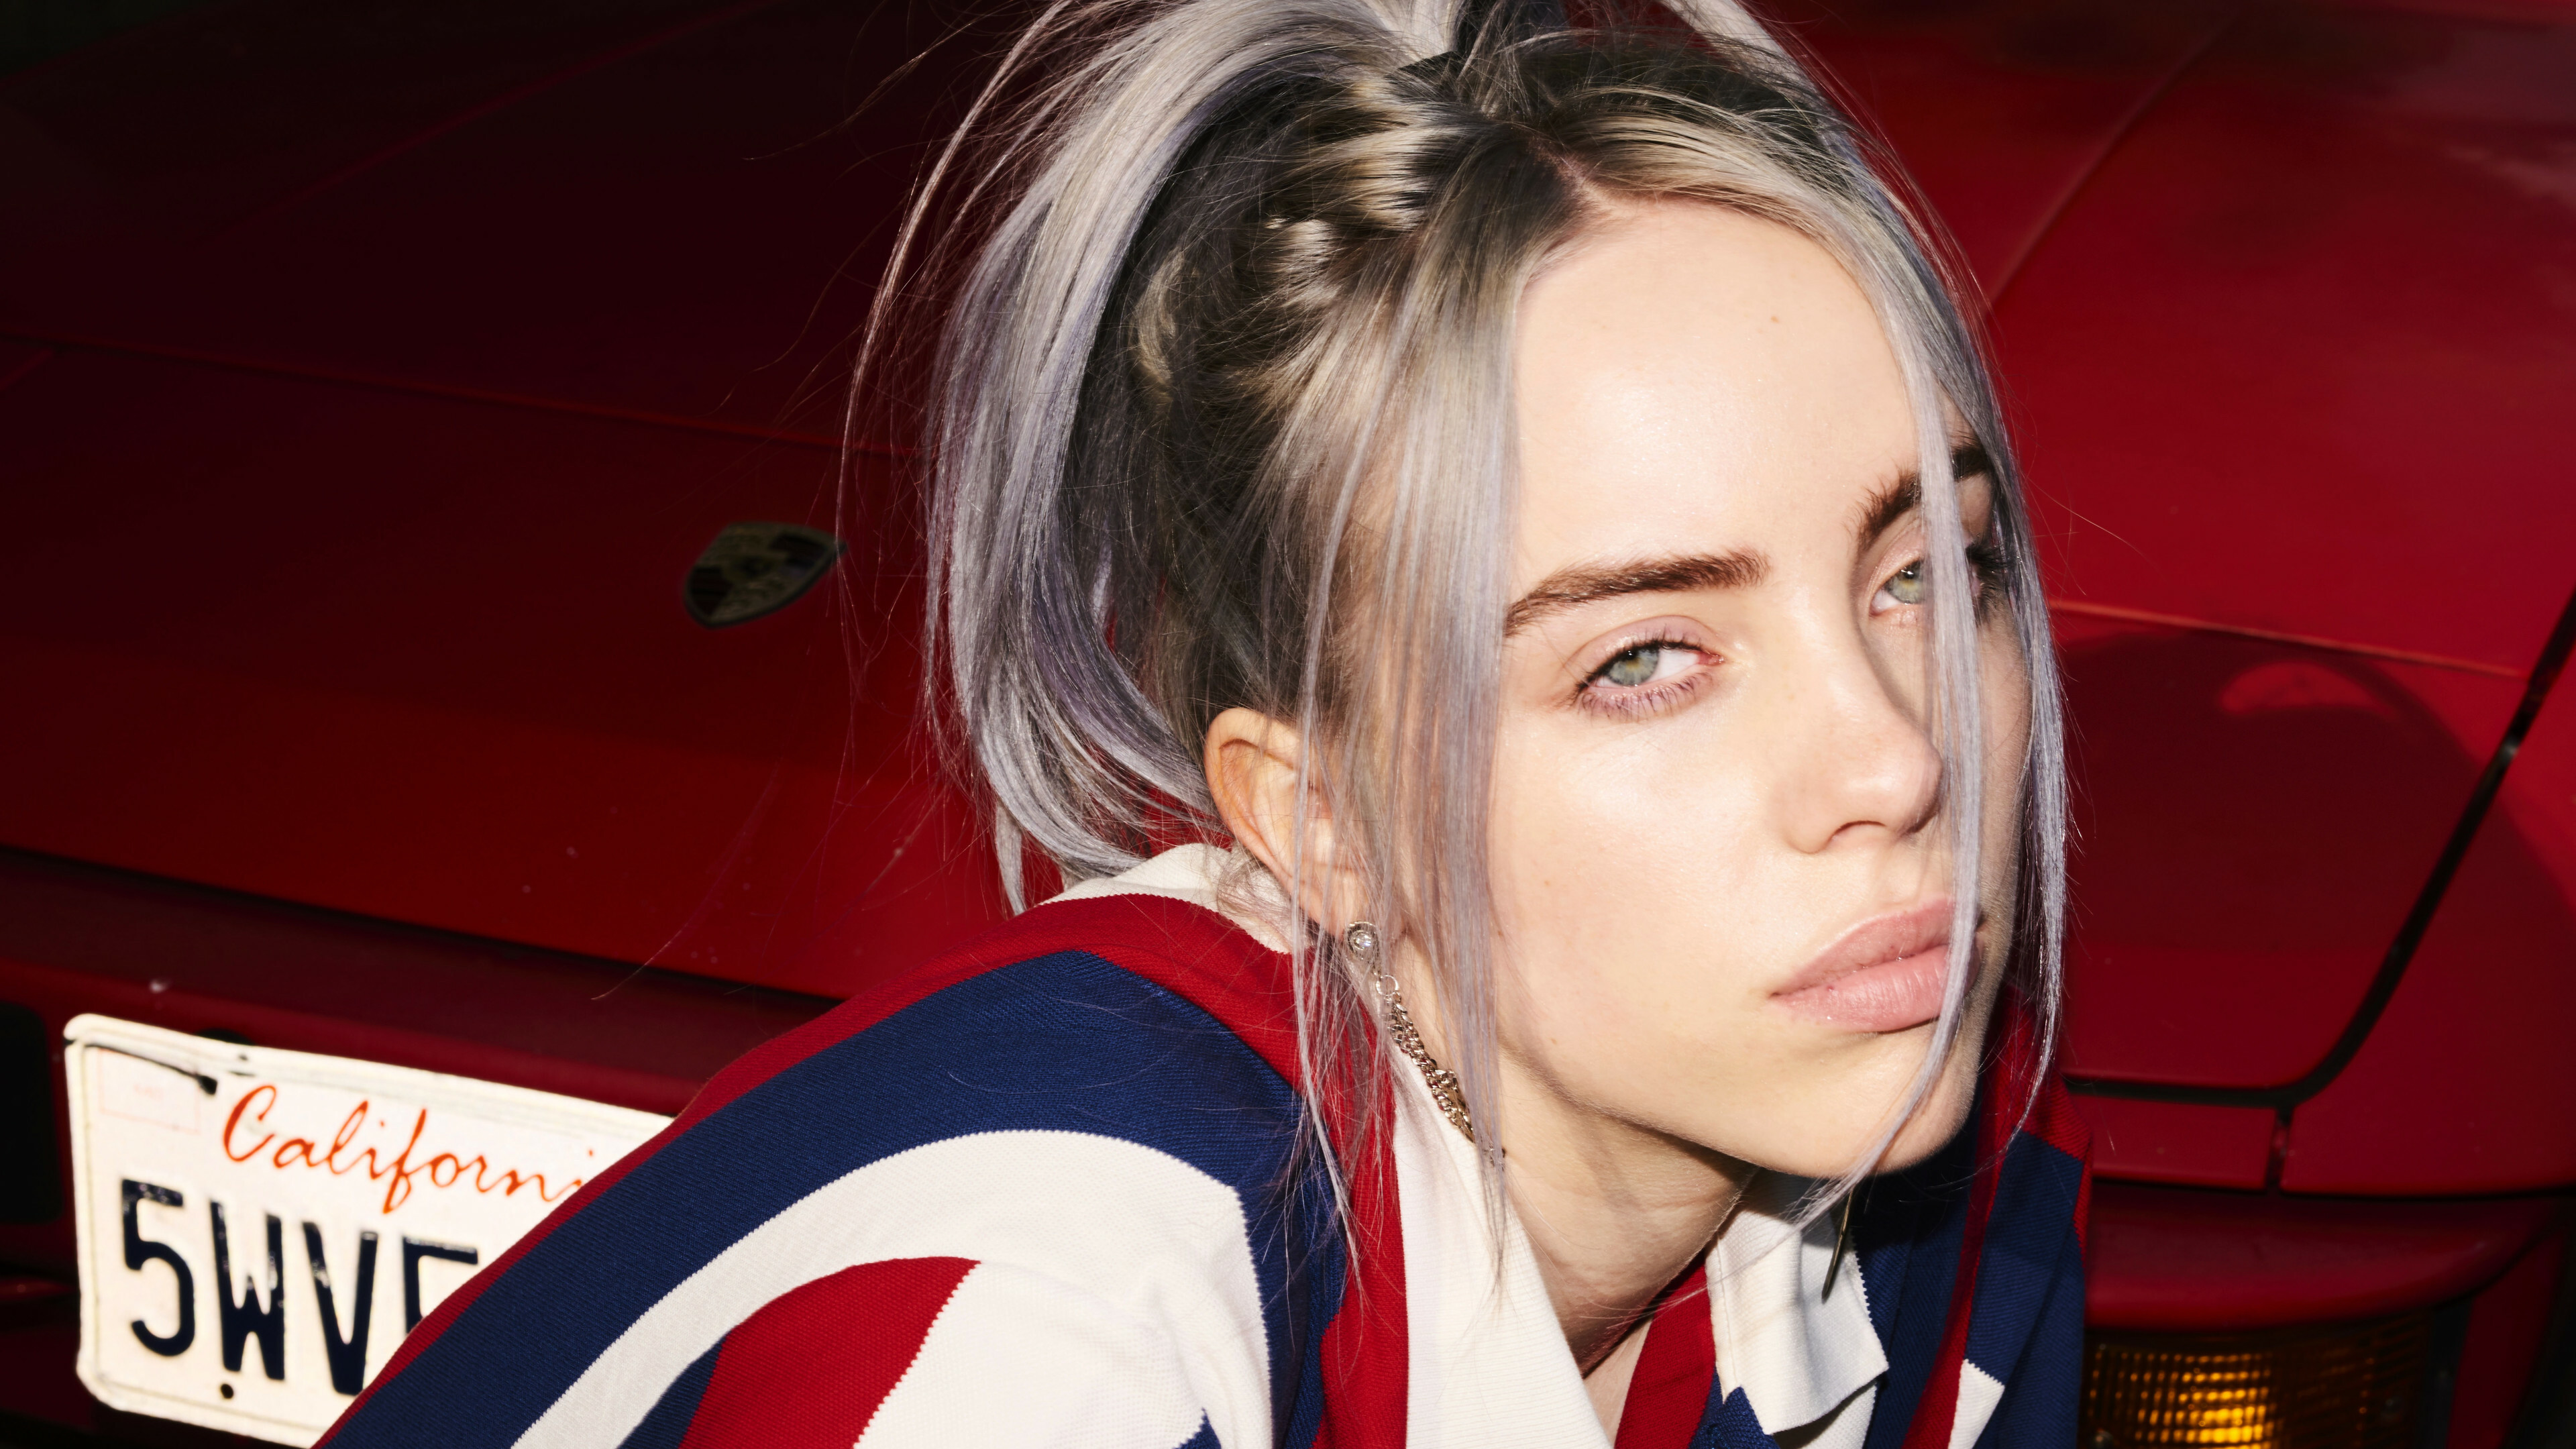 Billie Eilish: When We All Fall Asleep, Where Do We Go?, Debuted atop the US Billboard 200 and UK Albums Chart. 3840x2160 4K Background.